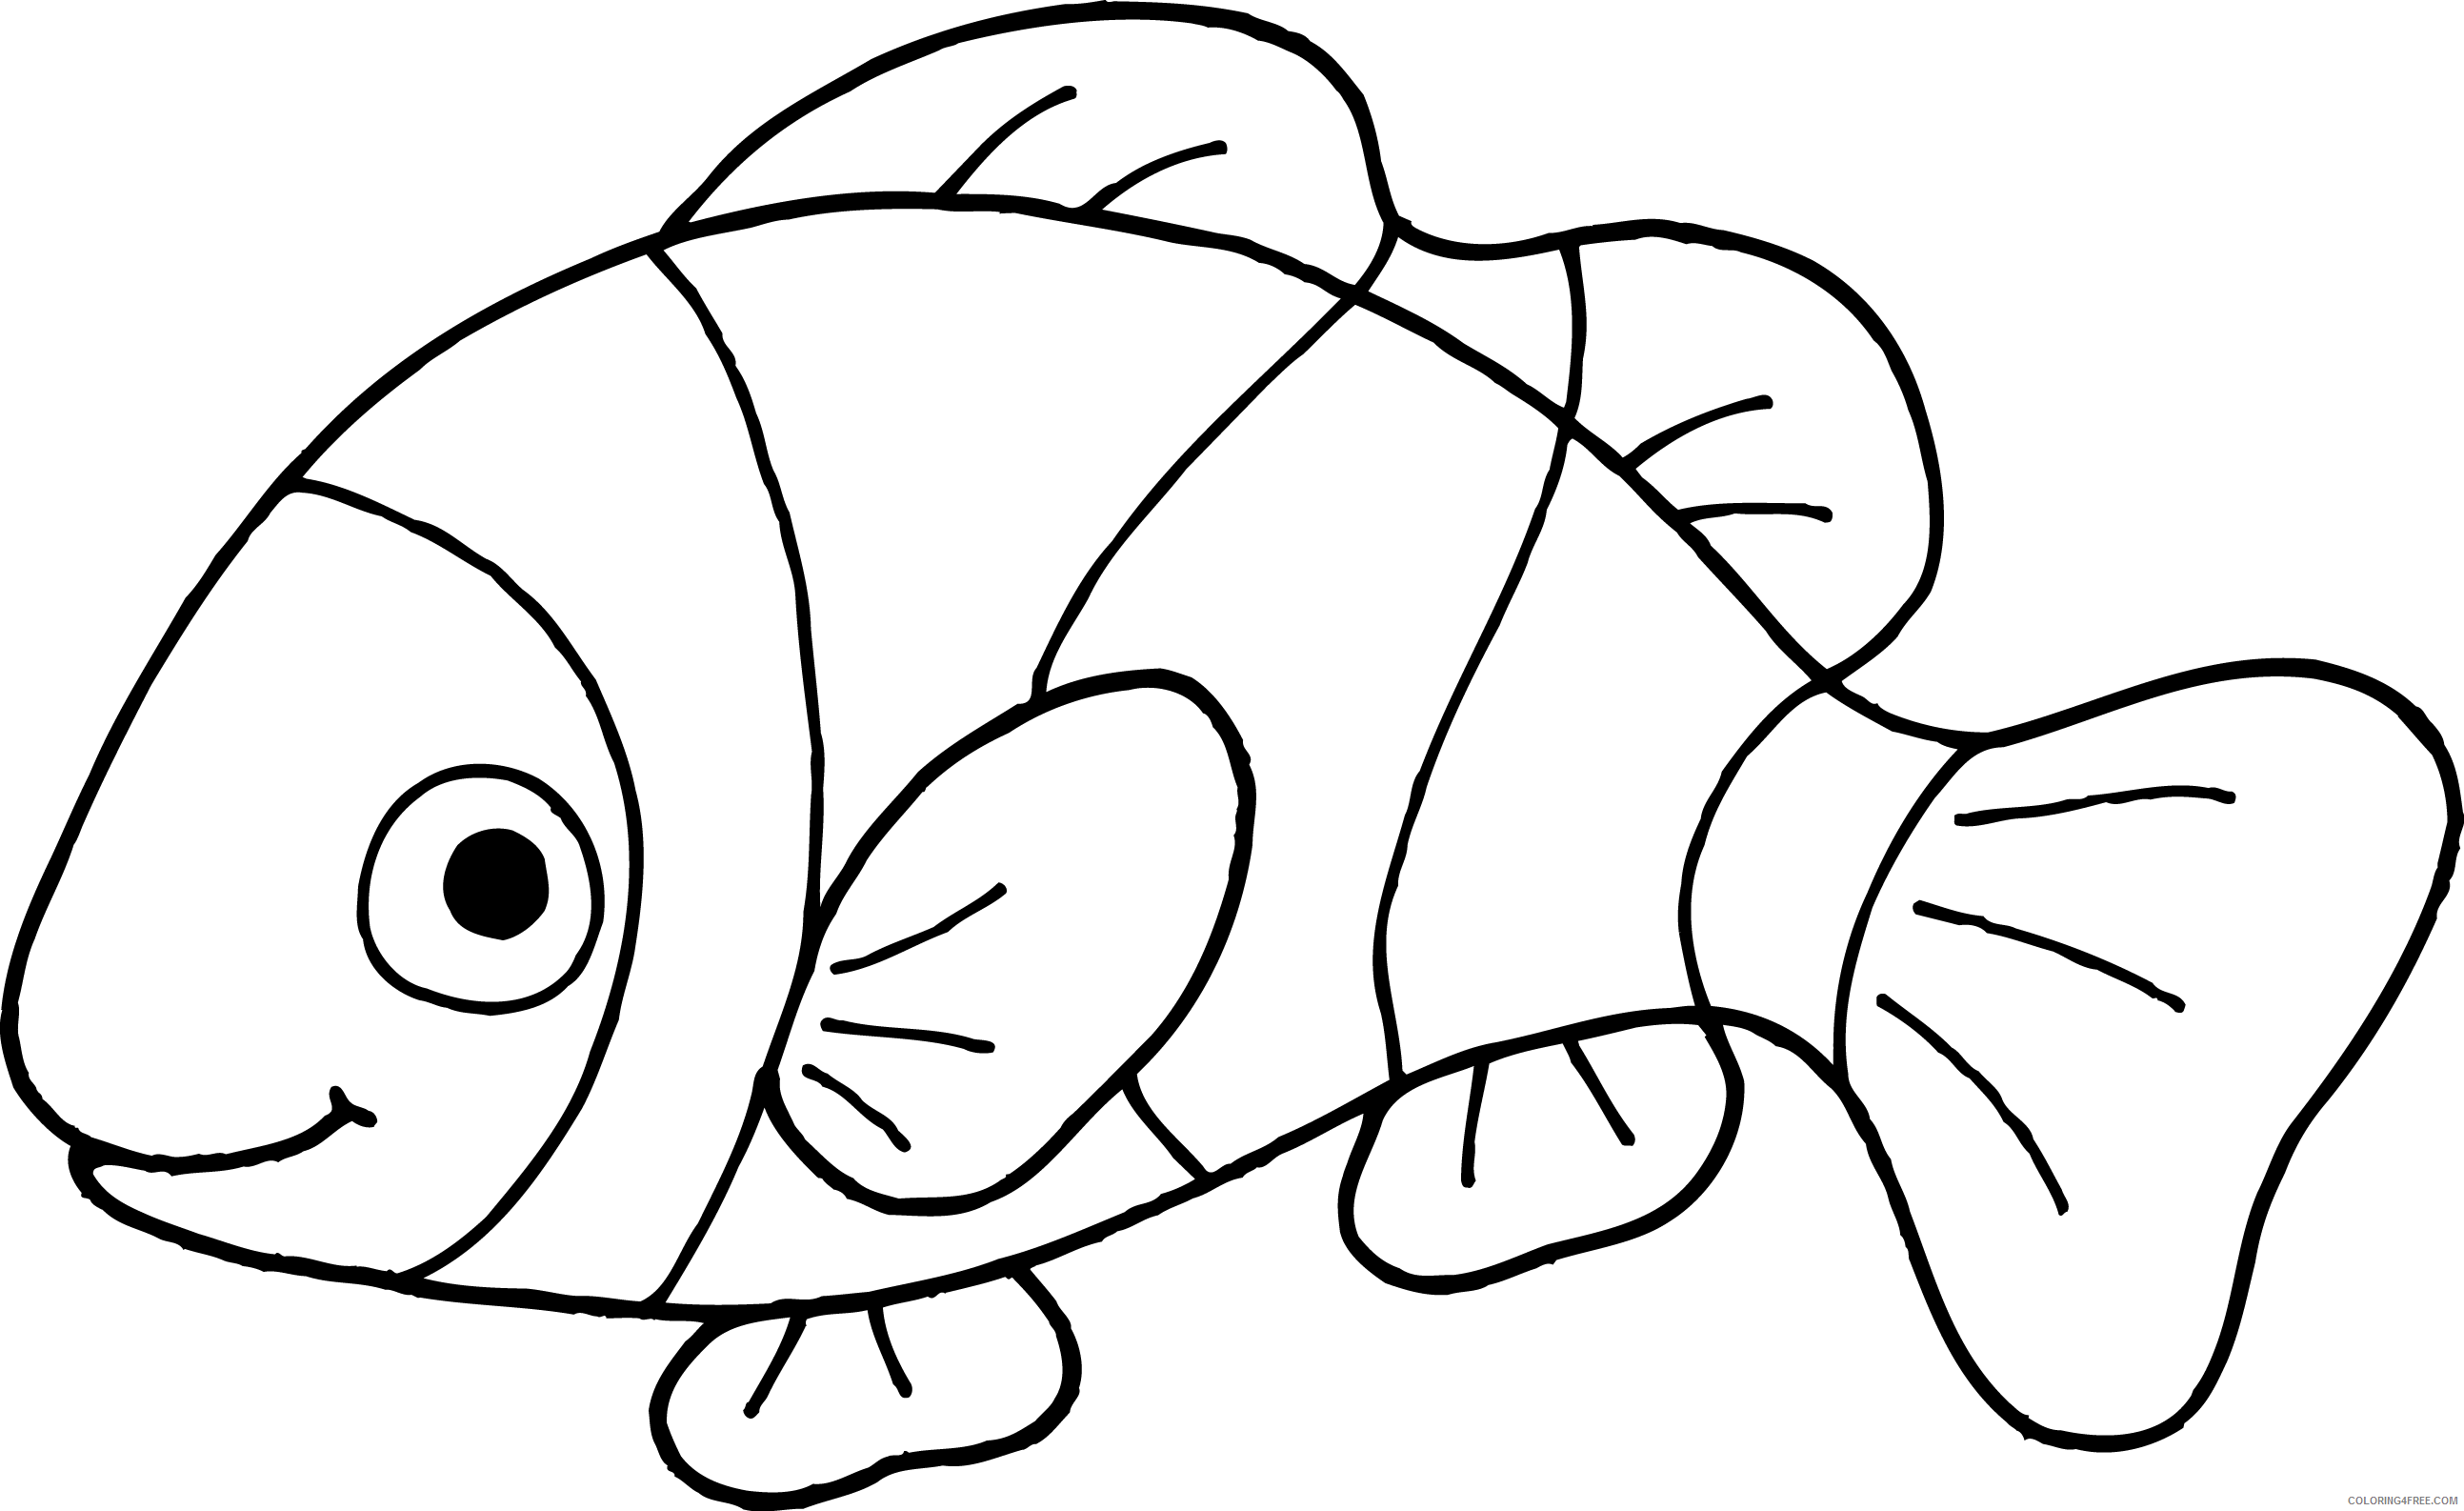 Clownfish Coloring Pages clownfish line art 4mrMqs clipart Printable Coloring4free